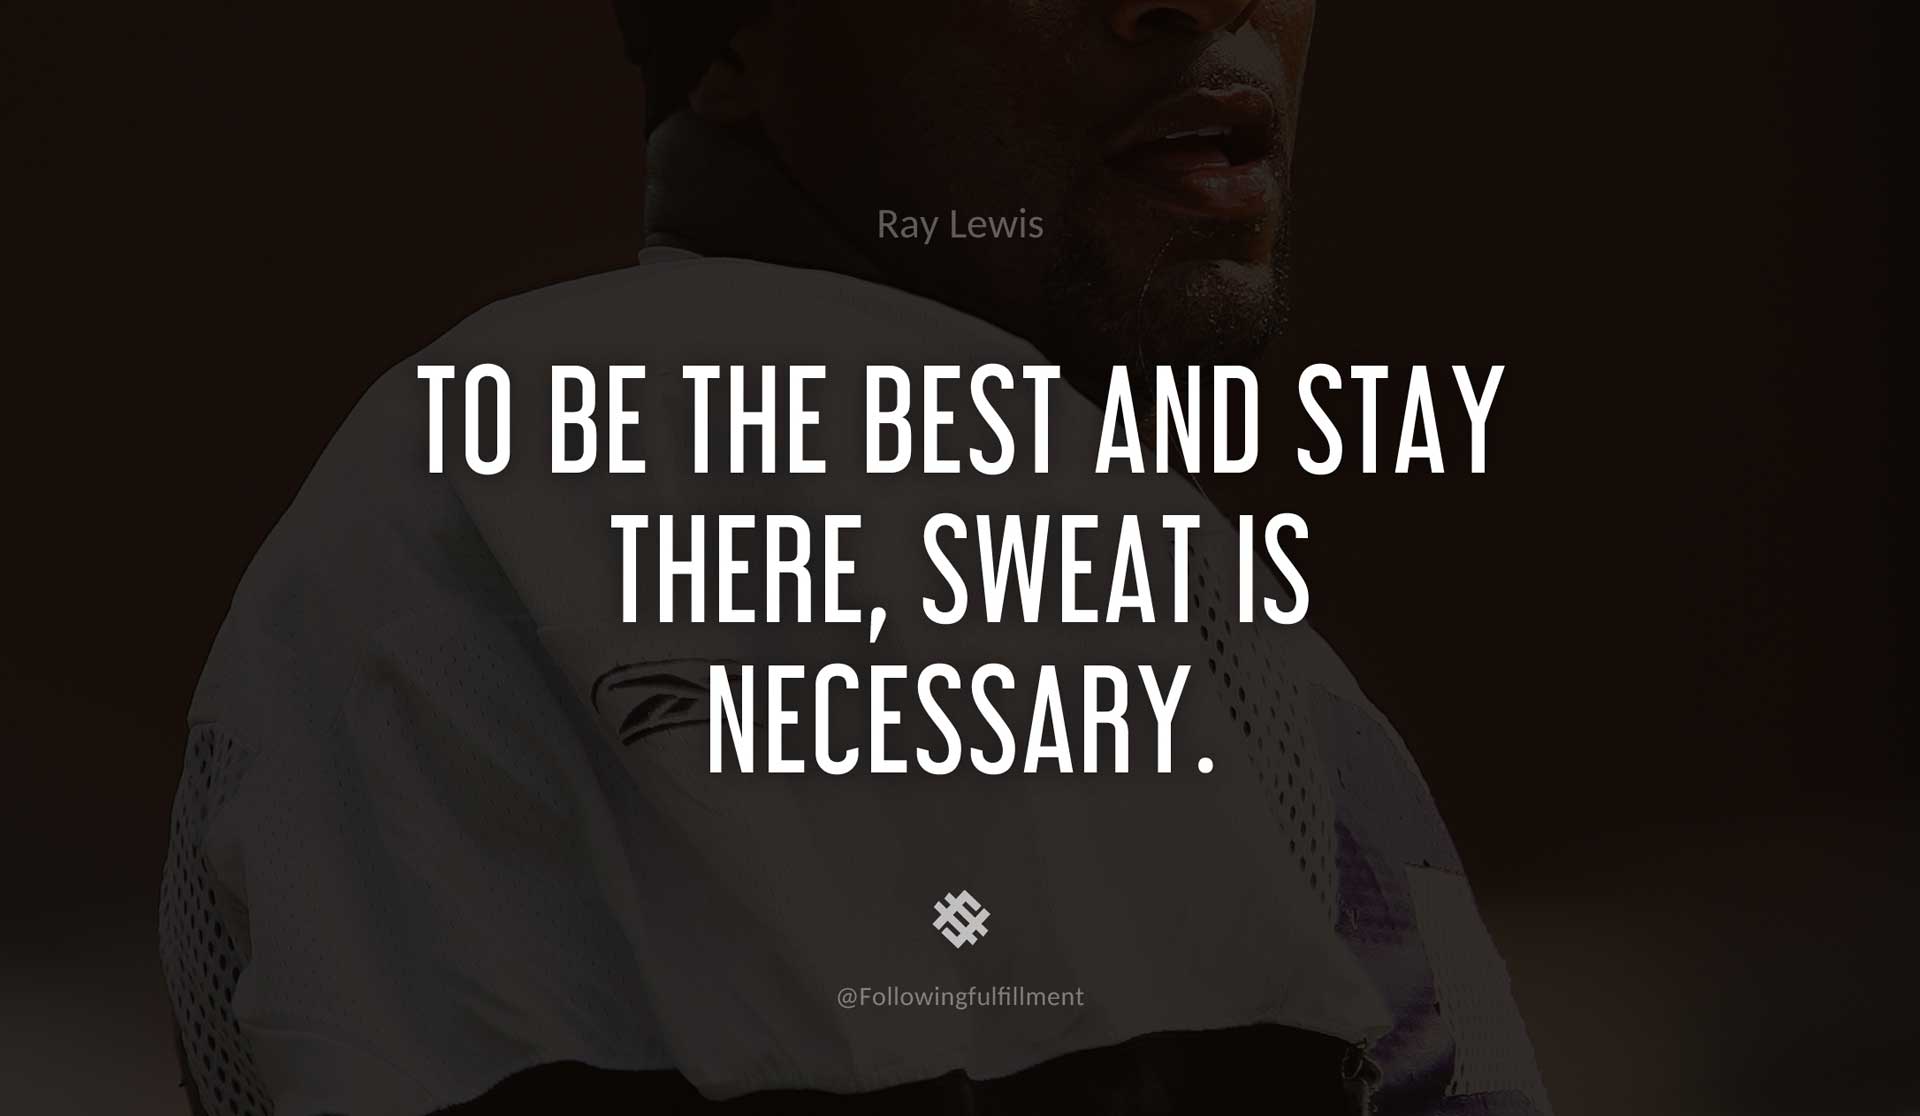 To-be-the-best-and-stay-there,-sweat-is-necessary.-RAY-LEWIS-Quote.jpg